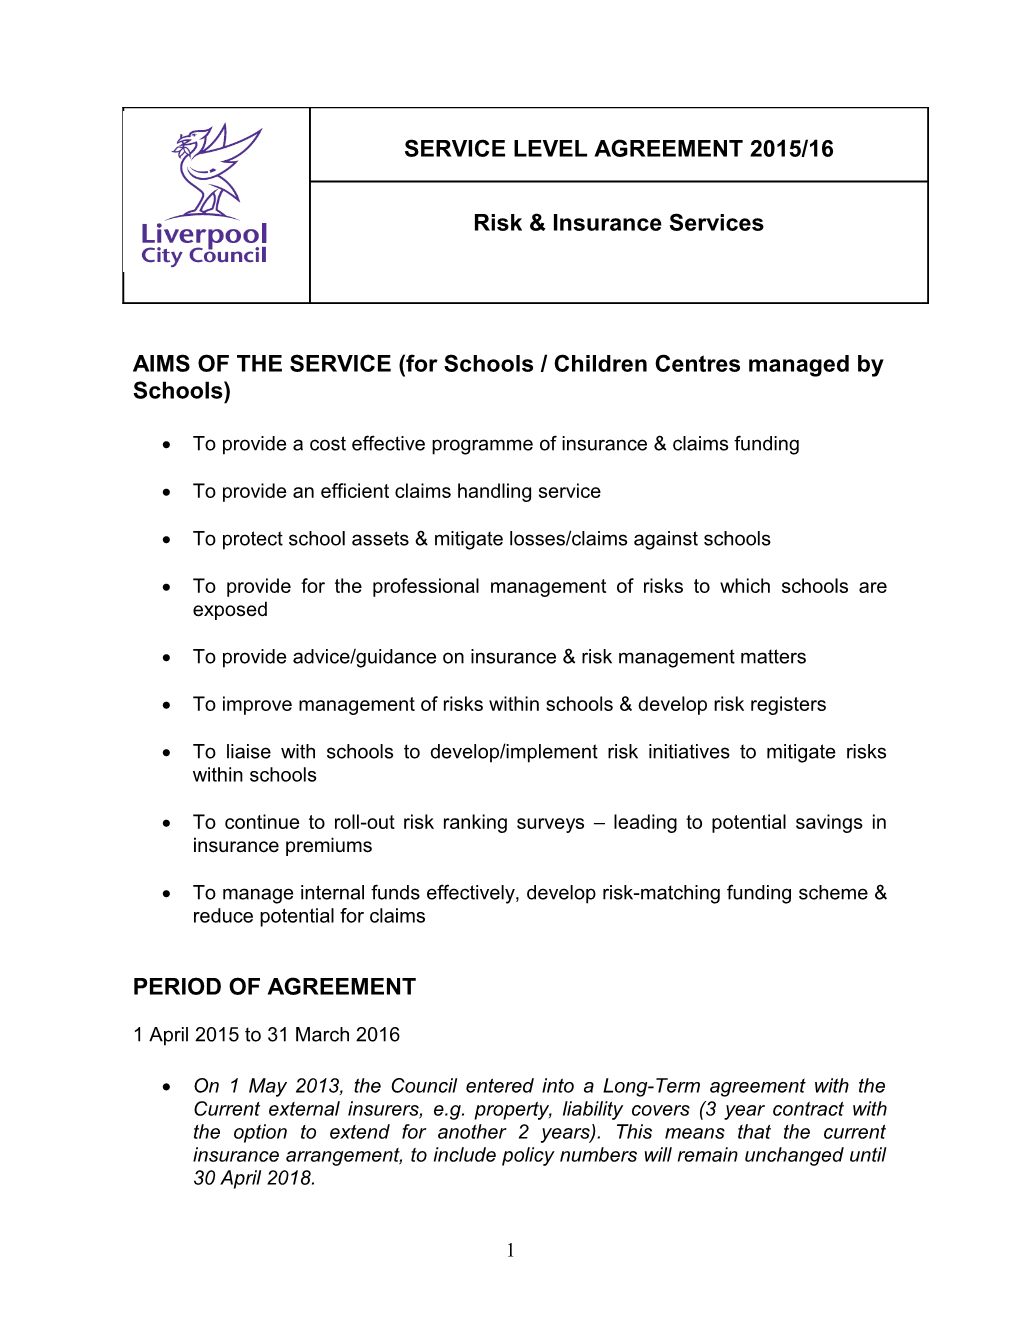 Service Level Agreement for Schools 2005/6